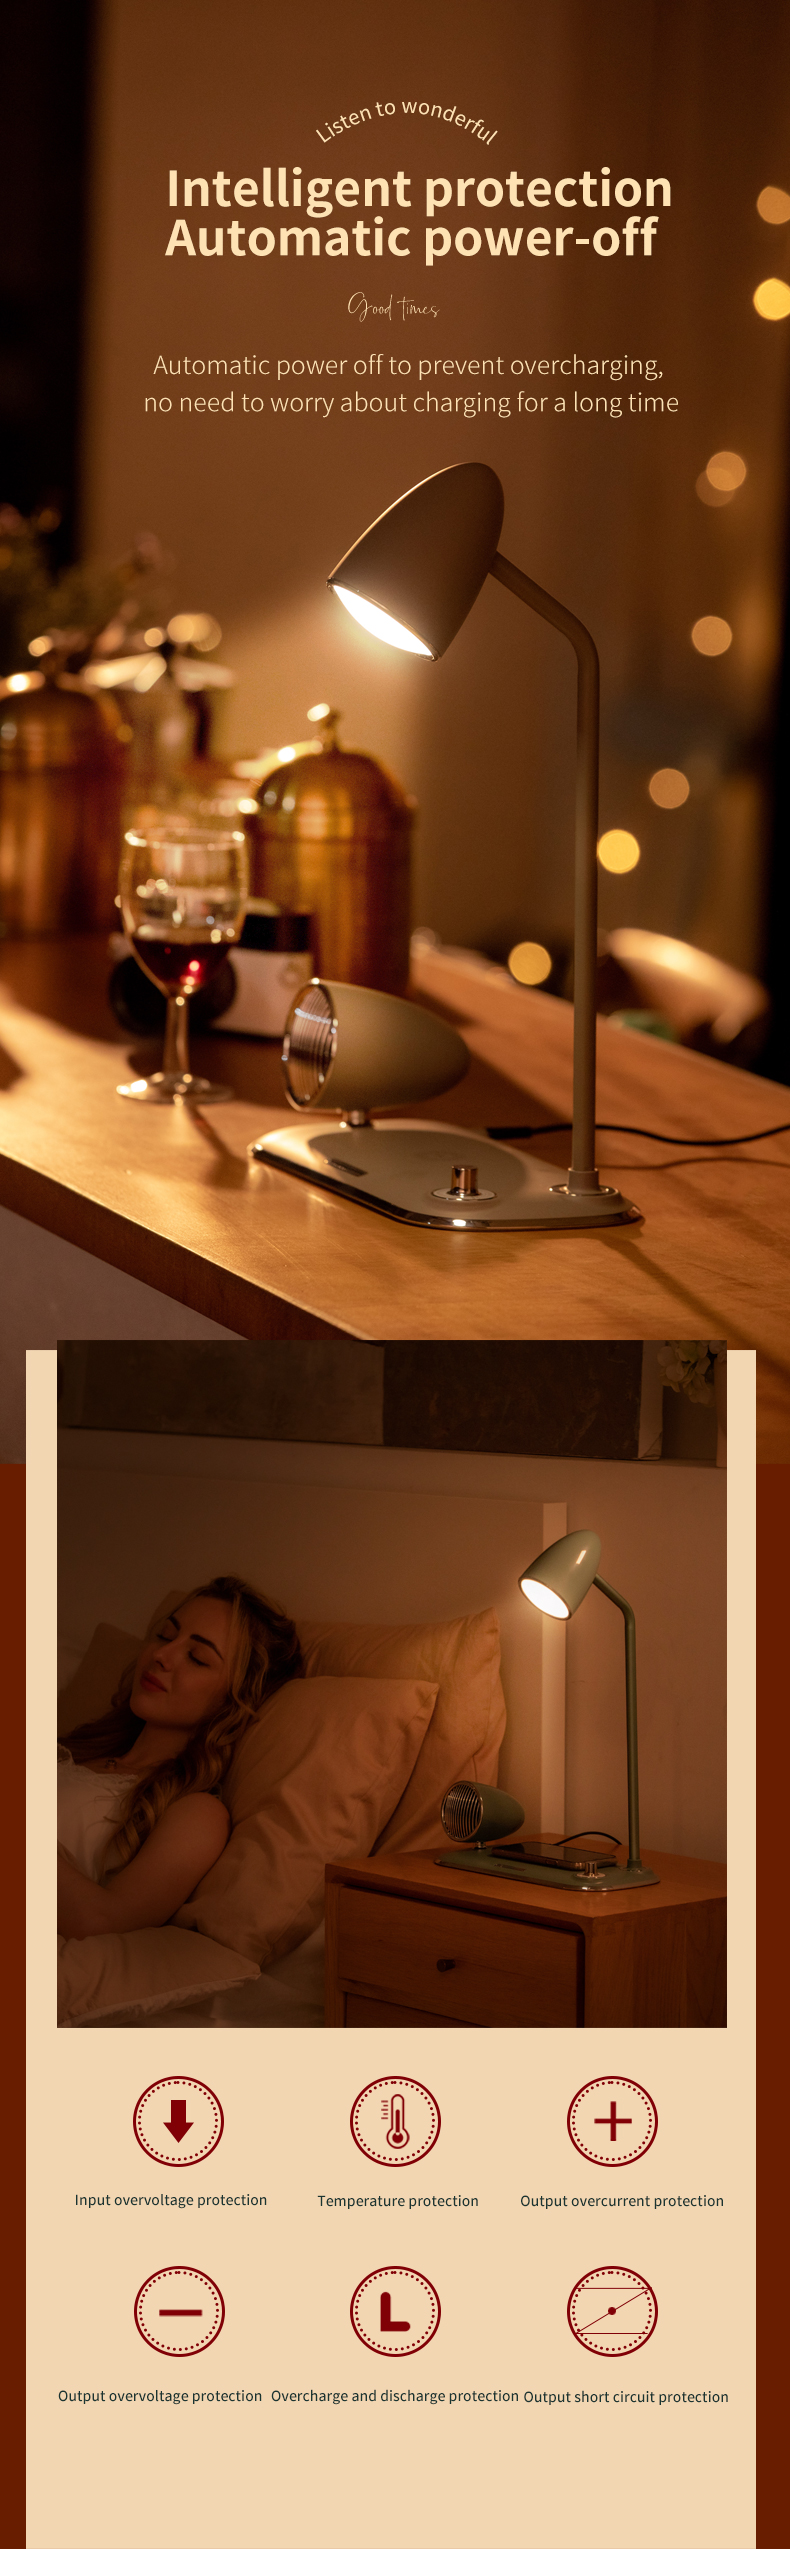 HHS31 High Quality Speakers Bluetooth  Led Desk Lamp With Wireless Charger Rotary Switches 360 Degree Removable Lamp Post Bedroom